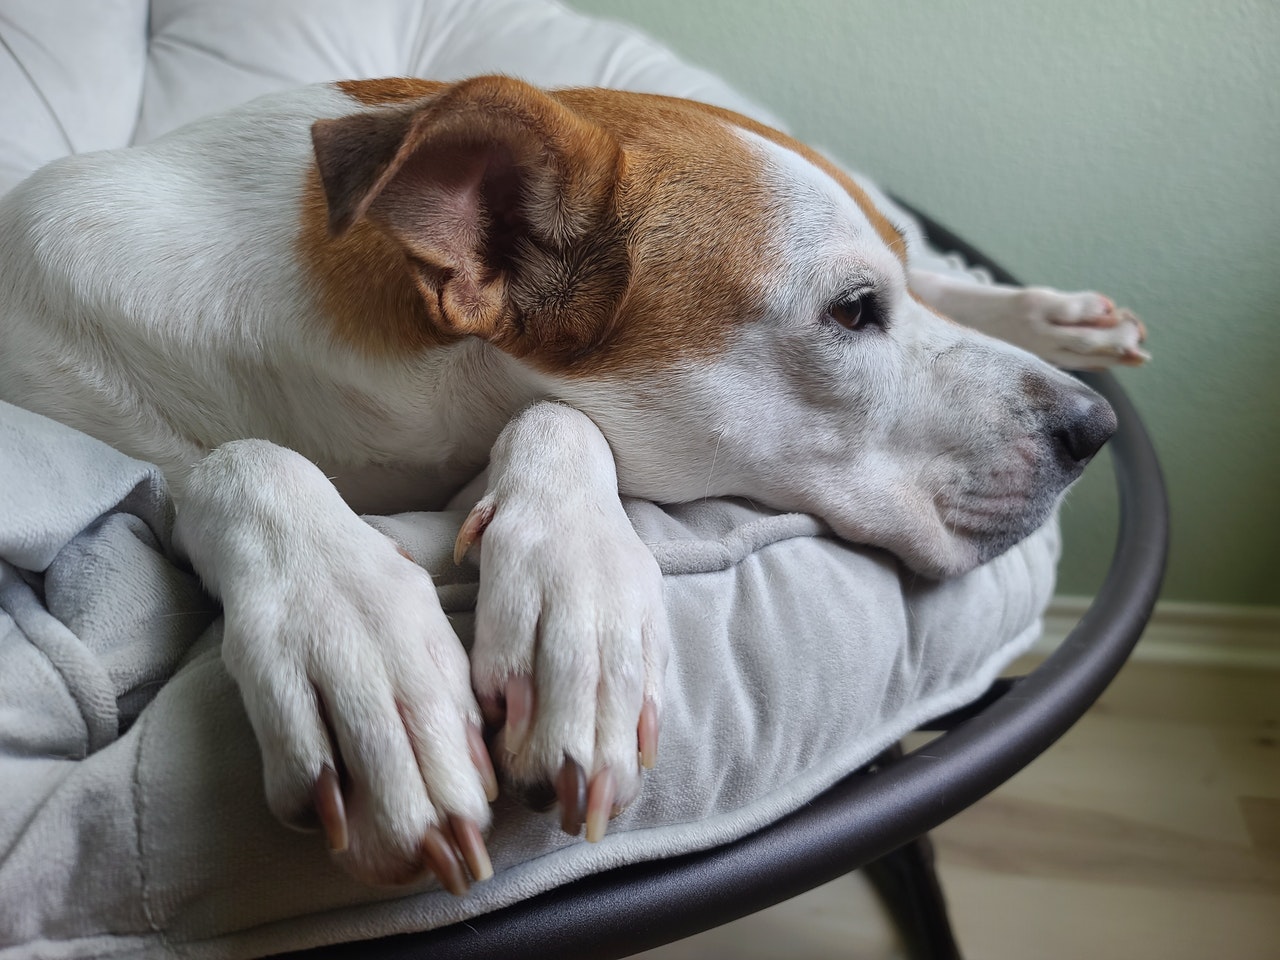 a brown and white dog with its paw resting on the cushion